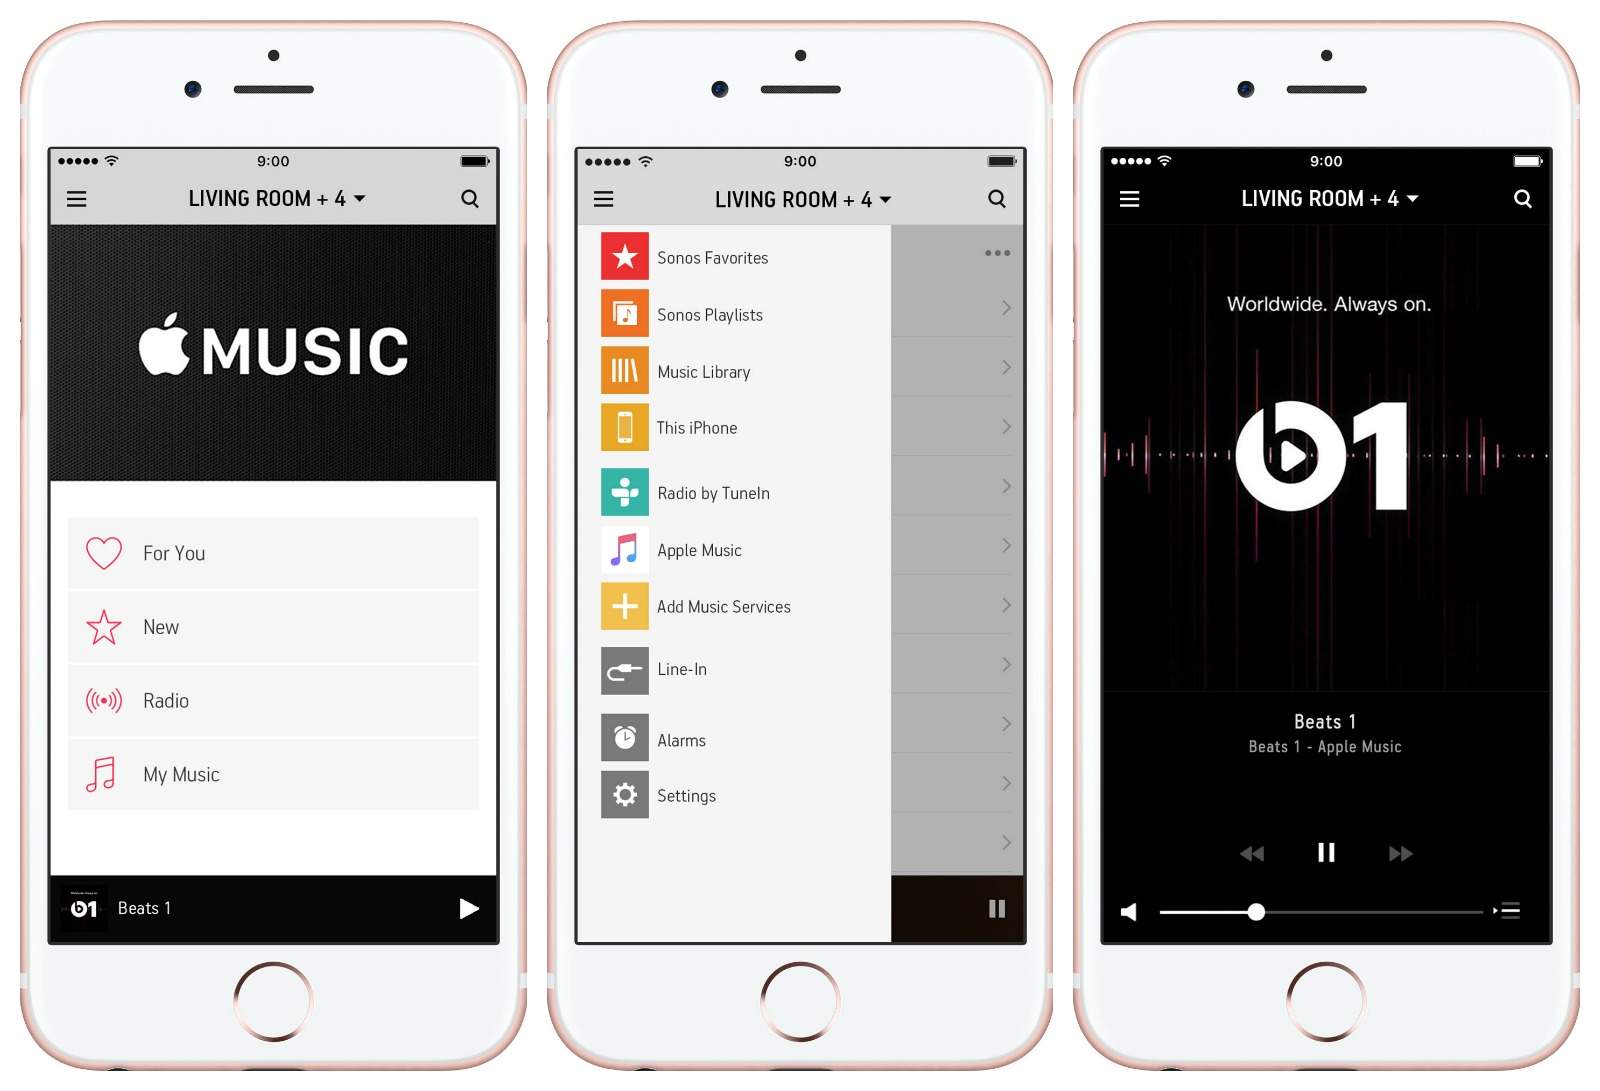 Apple Music is about to stream on Sonos smart speakers.